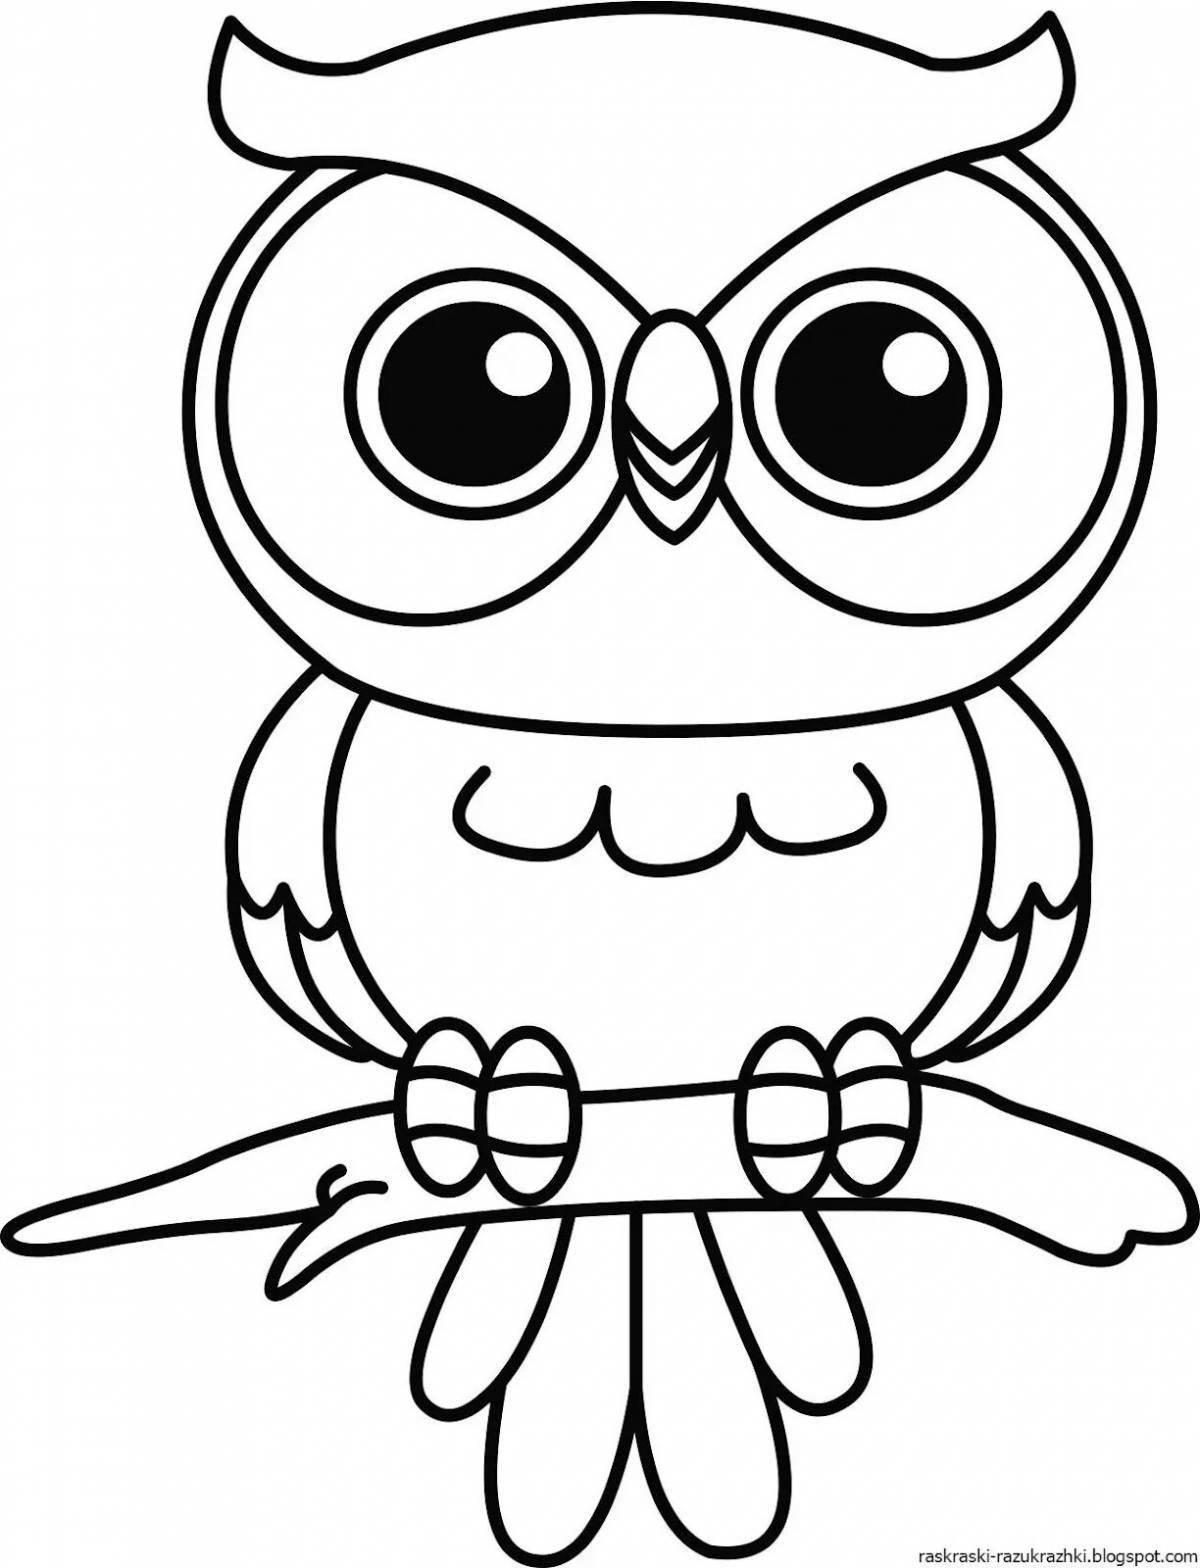 Majestic owl coloring book for kids